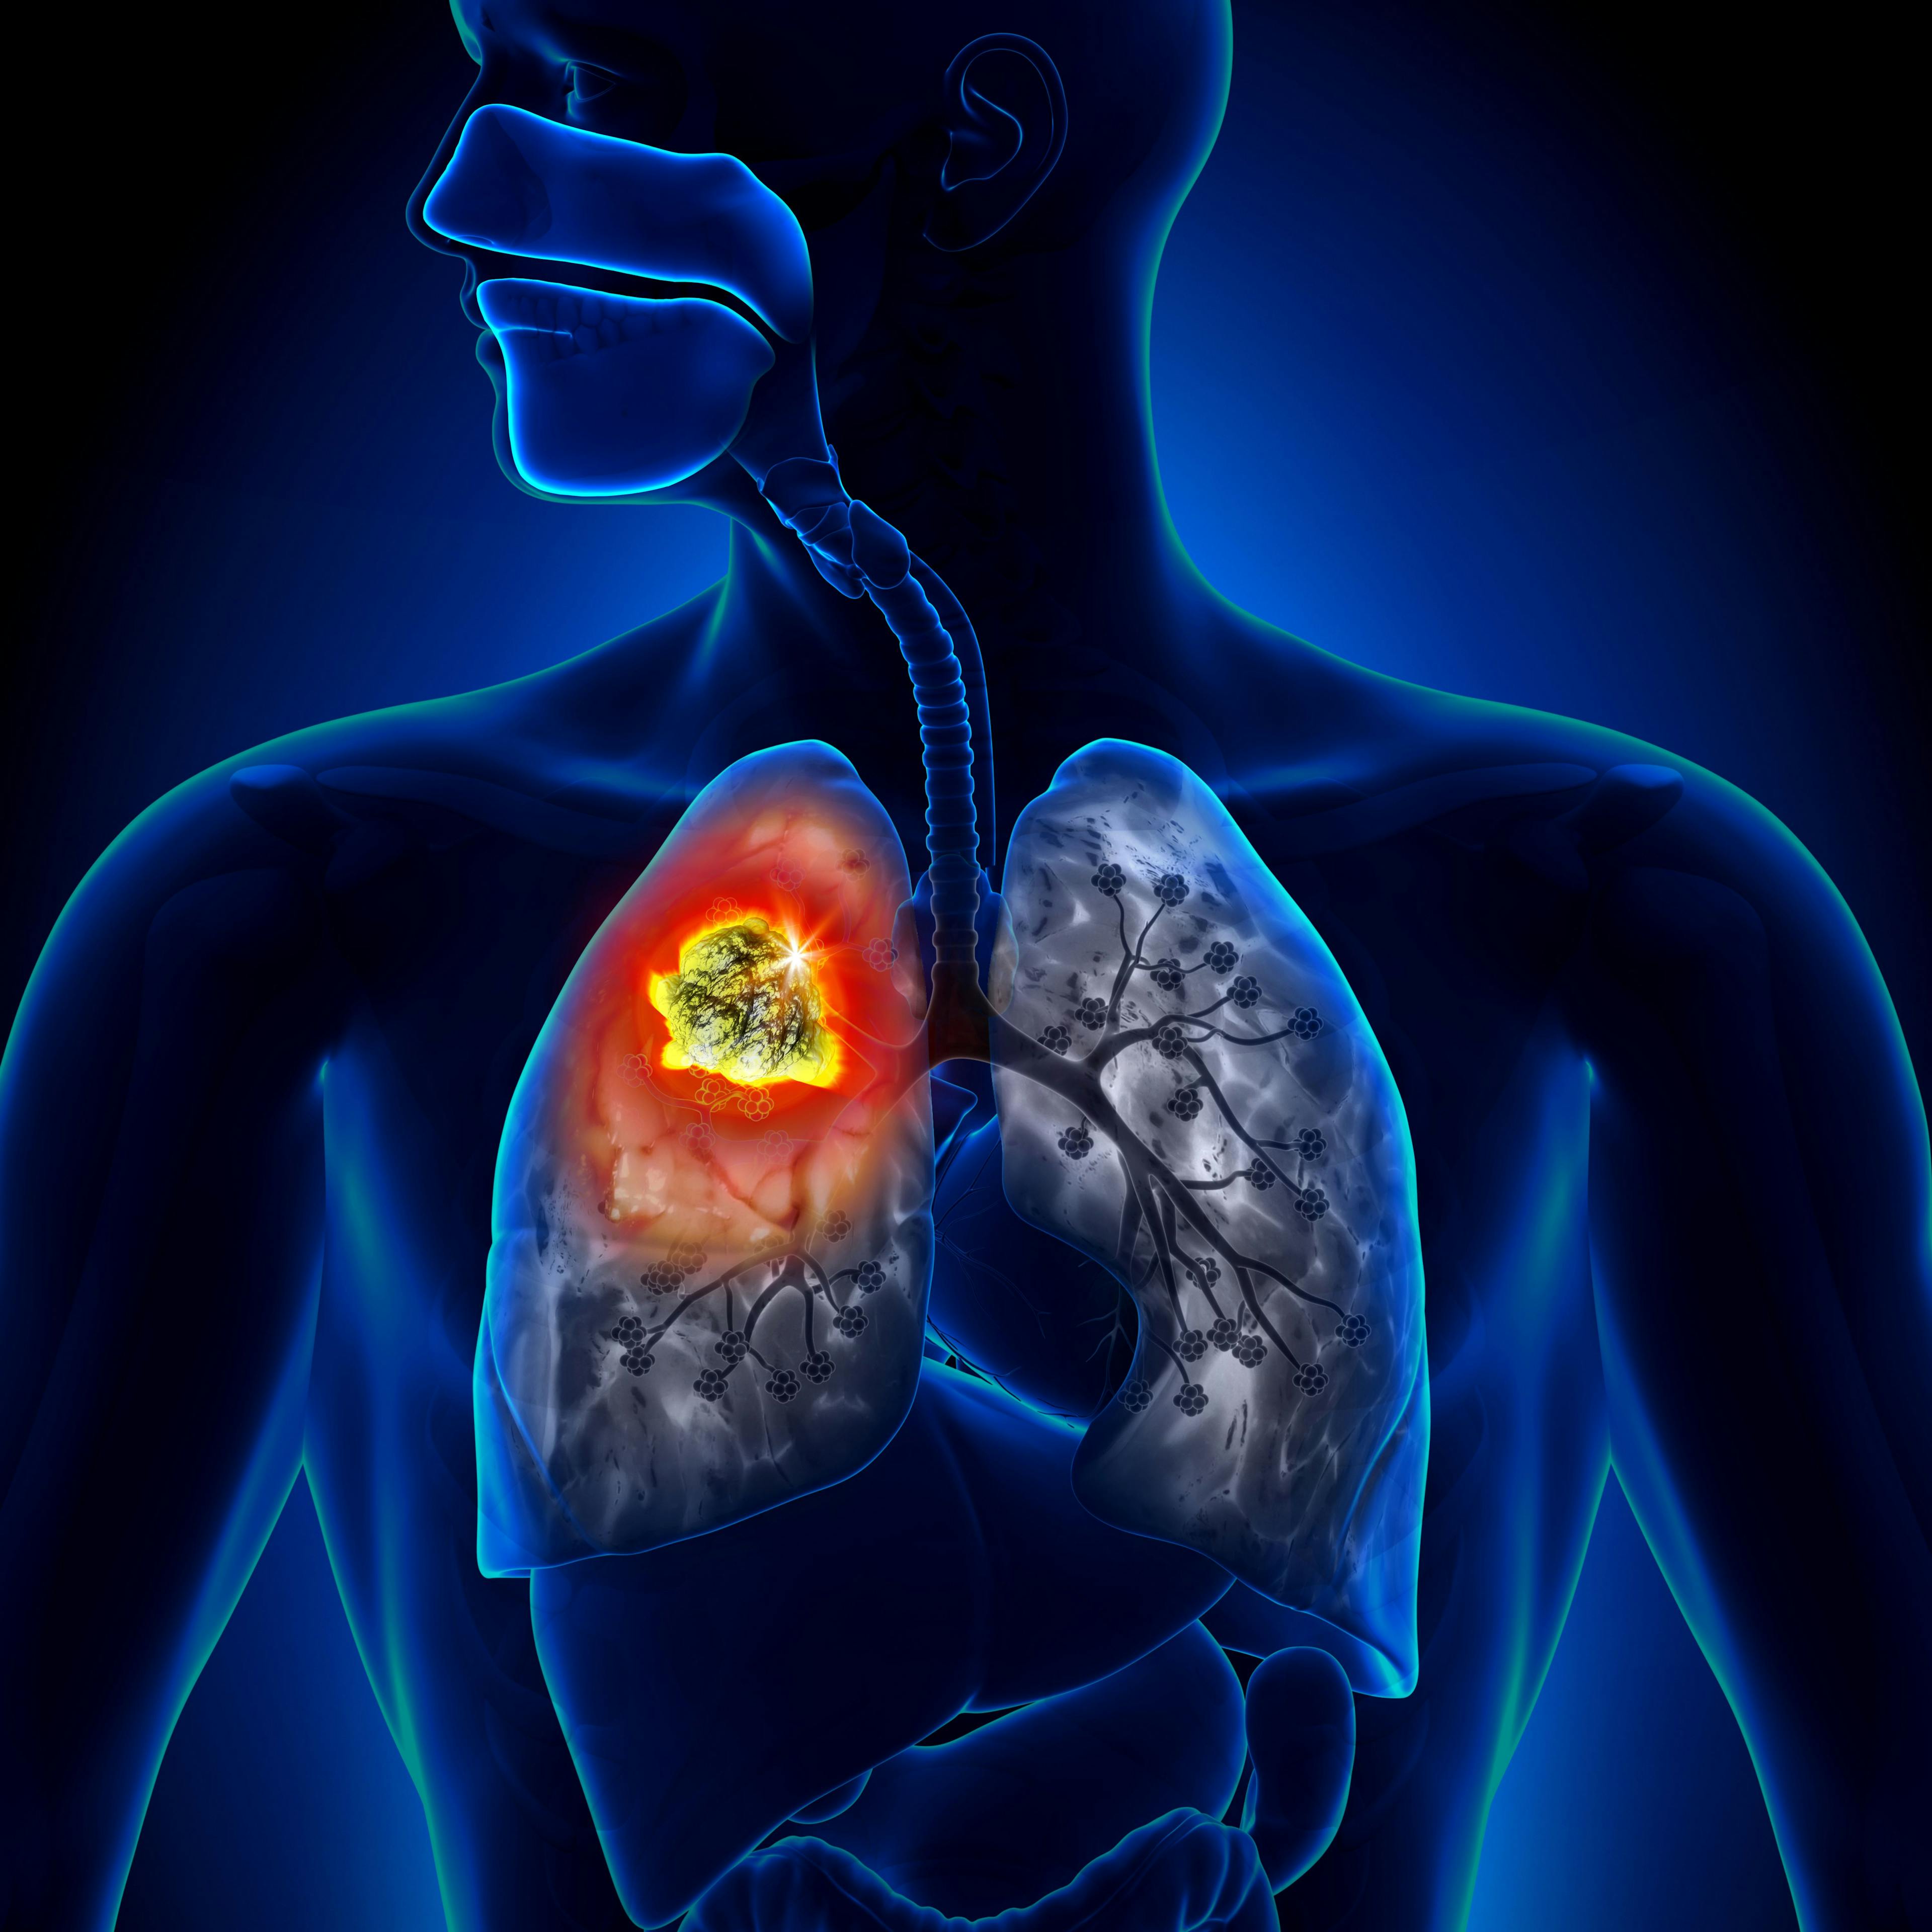 Lumakras Improves Outcomes, Quality of Life in Patients With Lung Cancer Subtype